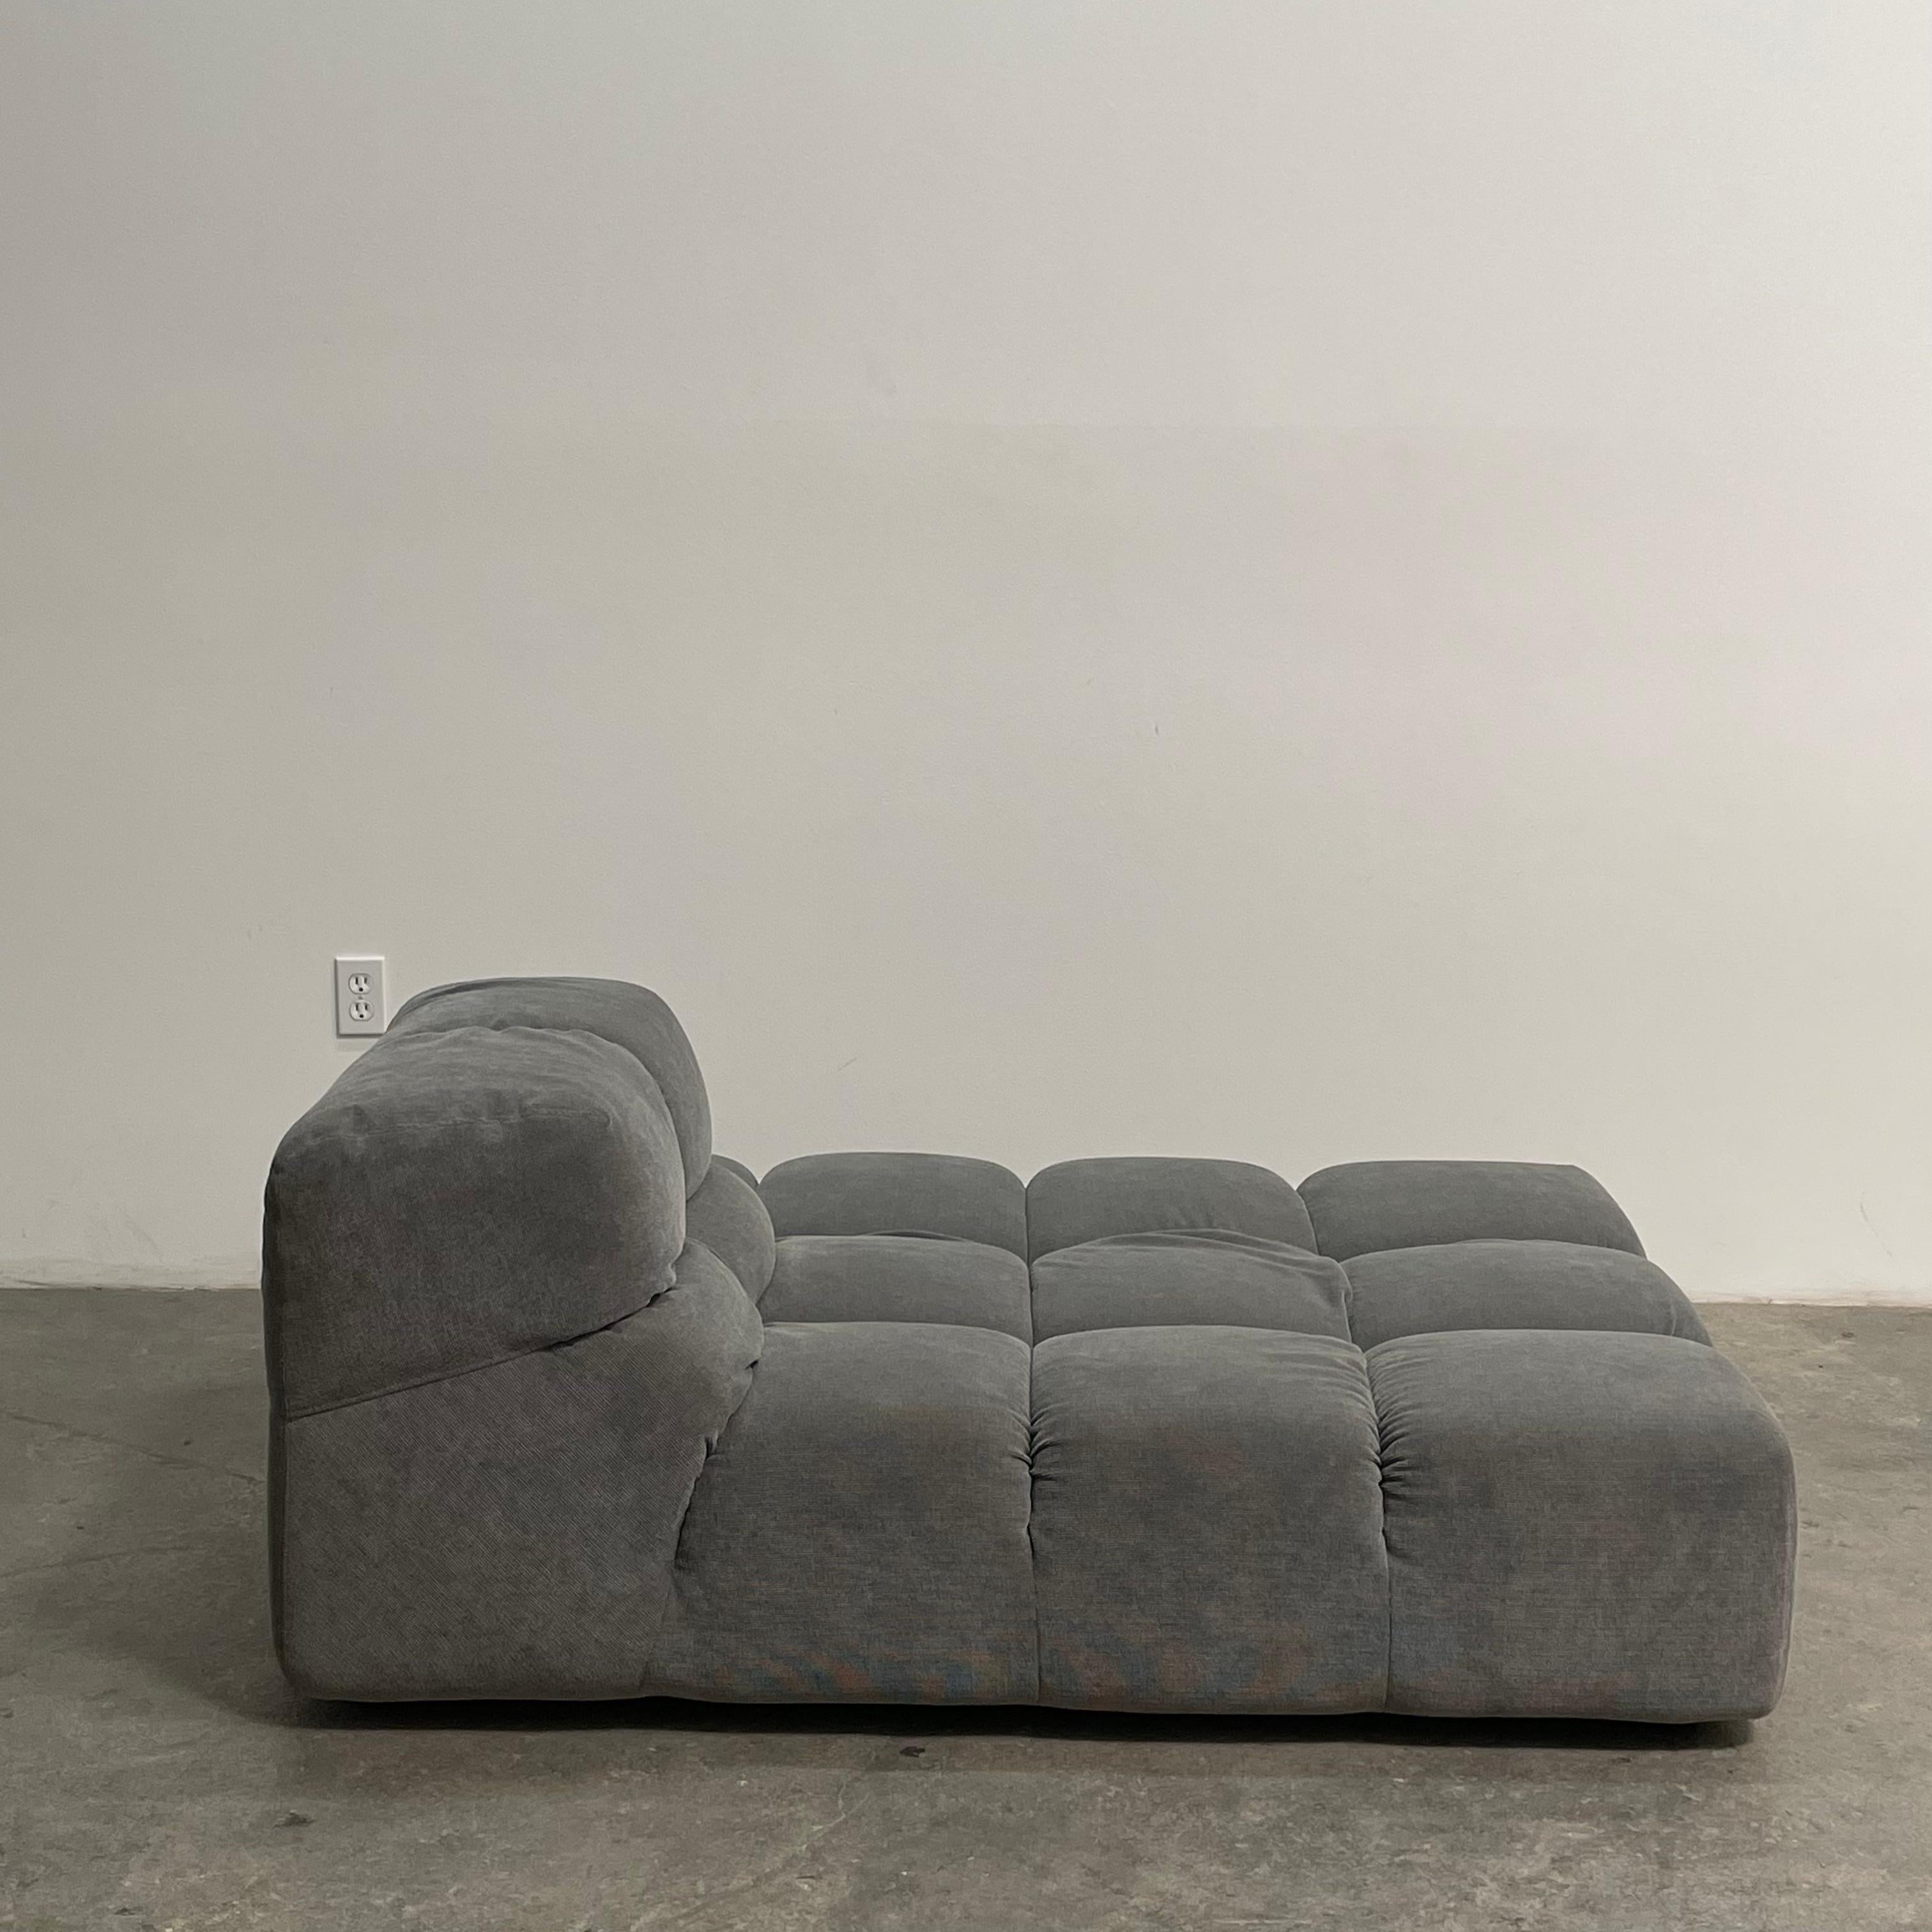 The Tufty-Time sofa series, designed by Patricia Urquiola for B&B Italia, is a modern take on traditional Chesterfield sofas.

The modular system starts with an ottoman, which is then accompanied by central, corner and terminal elements with a low